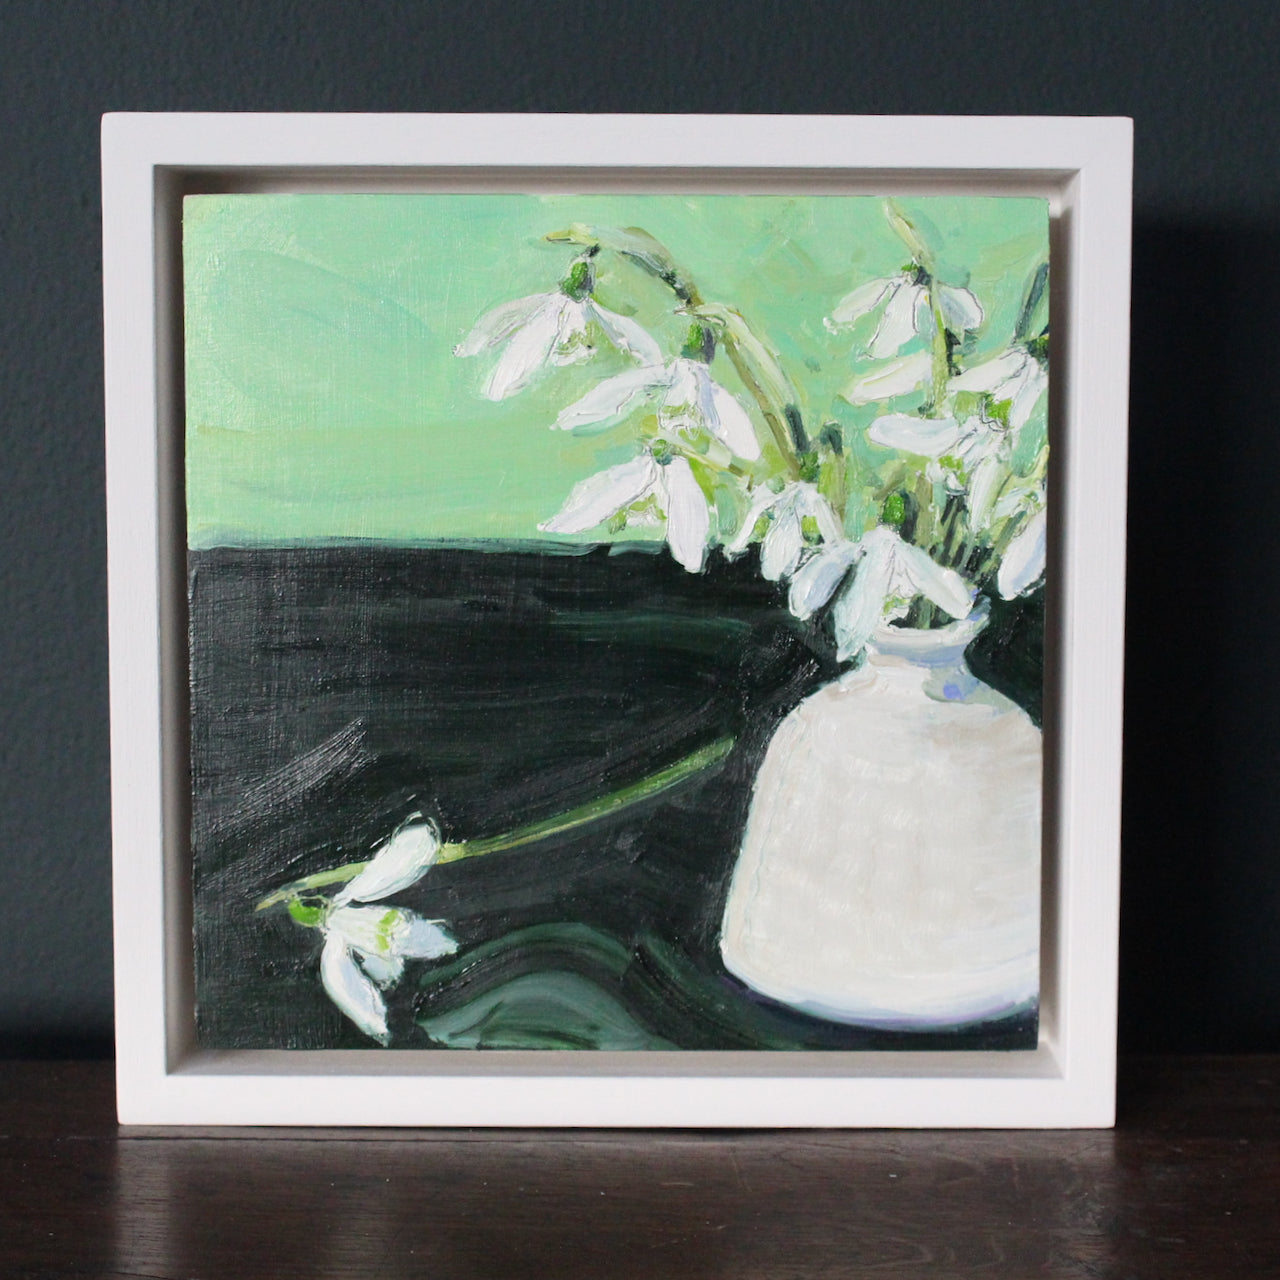 framed Jill Hudson oil painting of snowdrops in a small white vase against a green background.